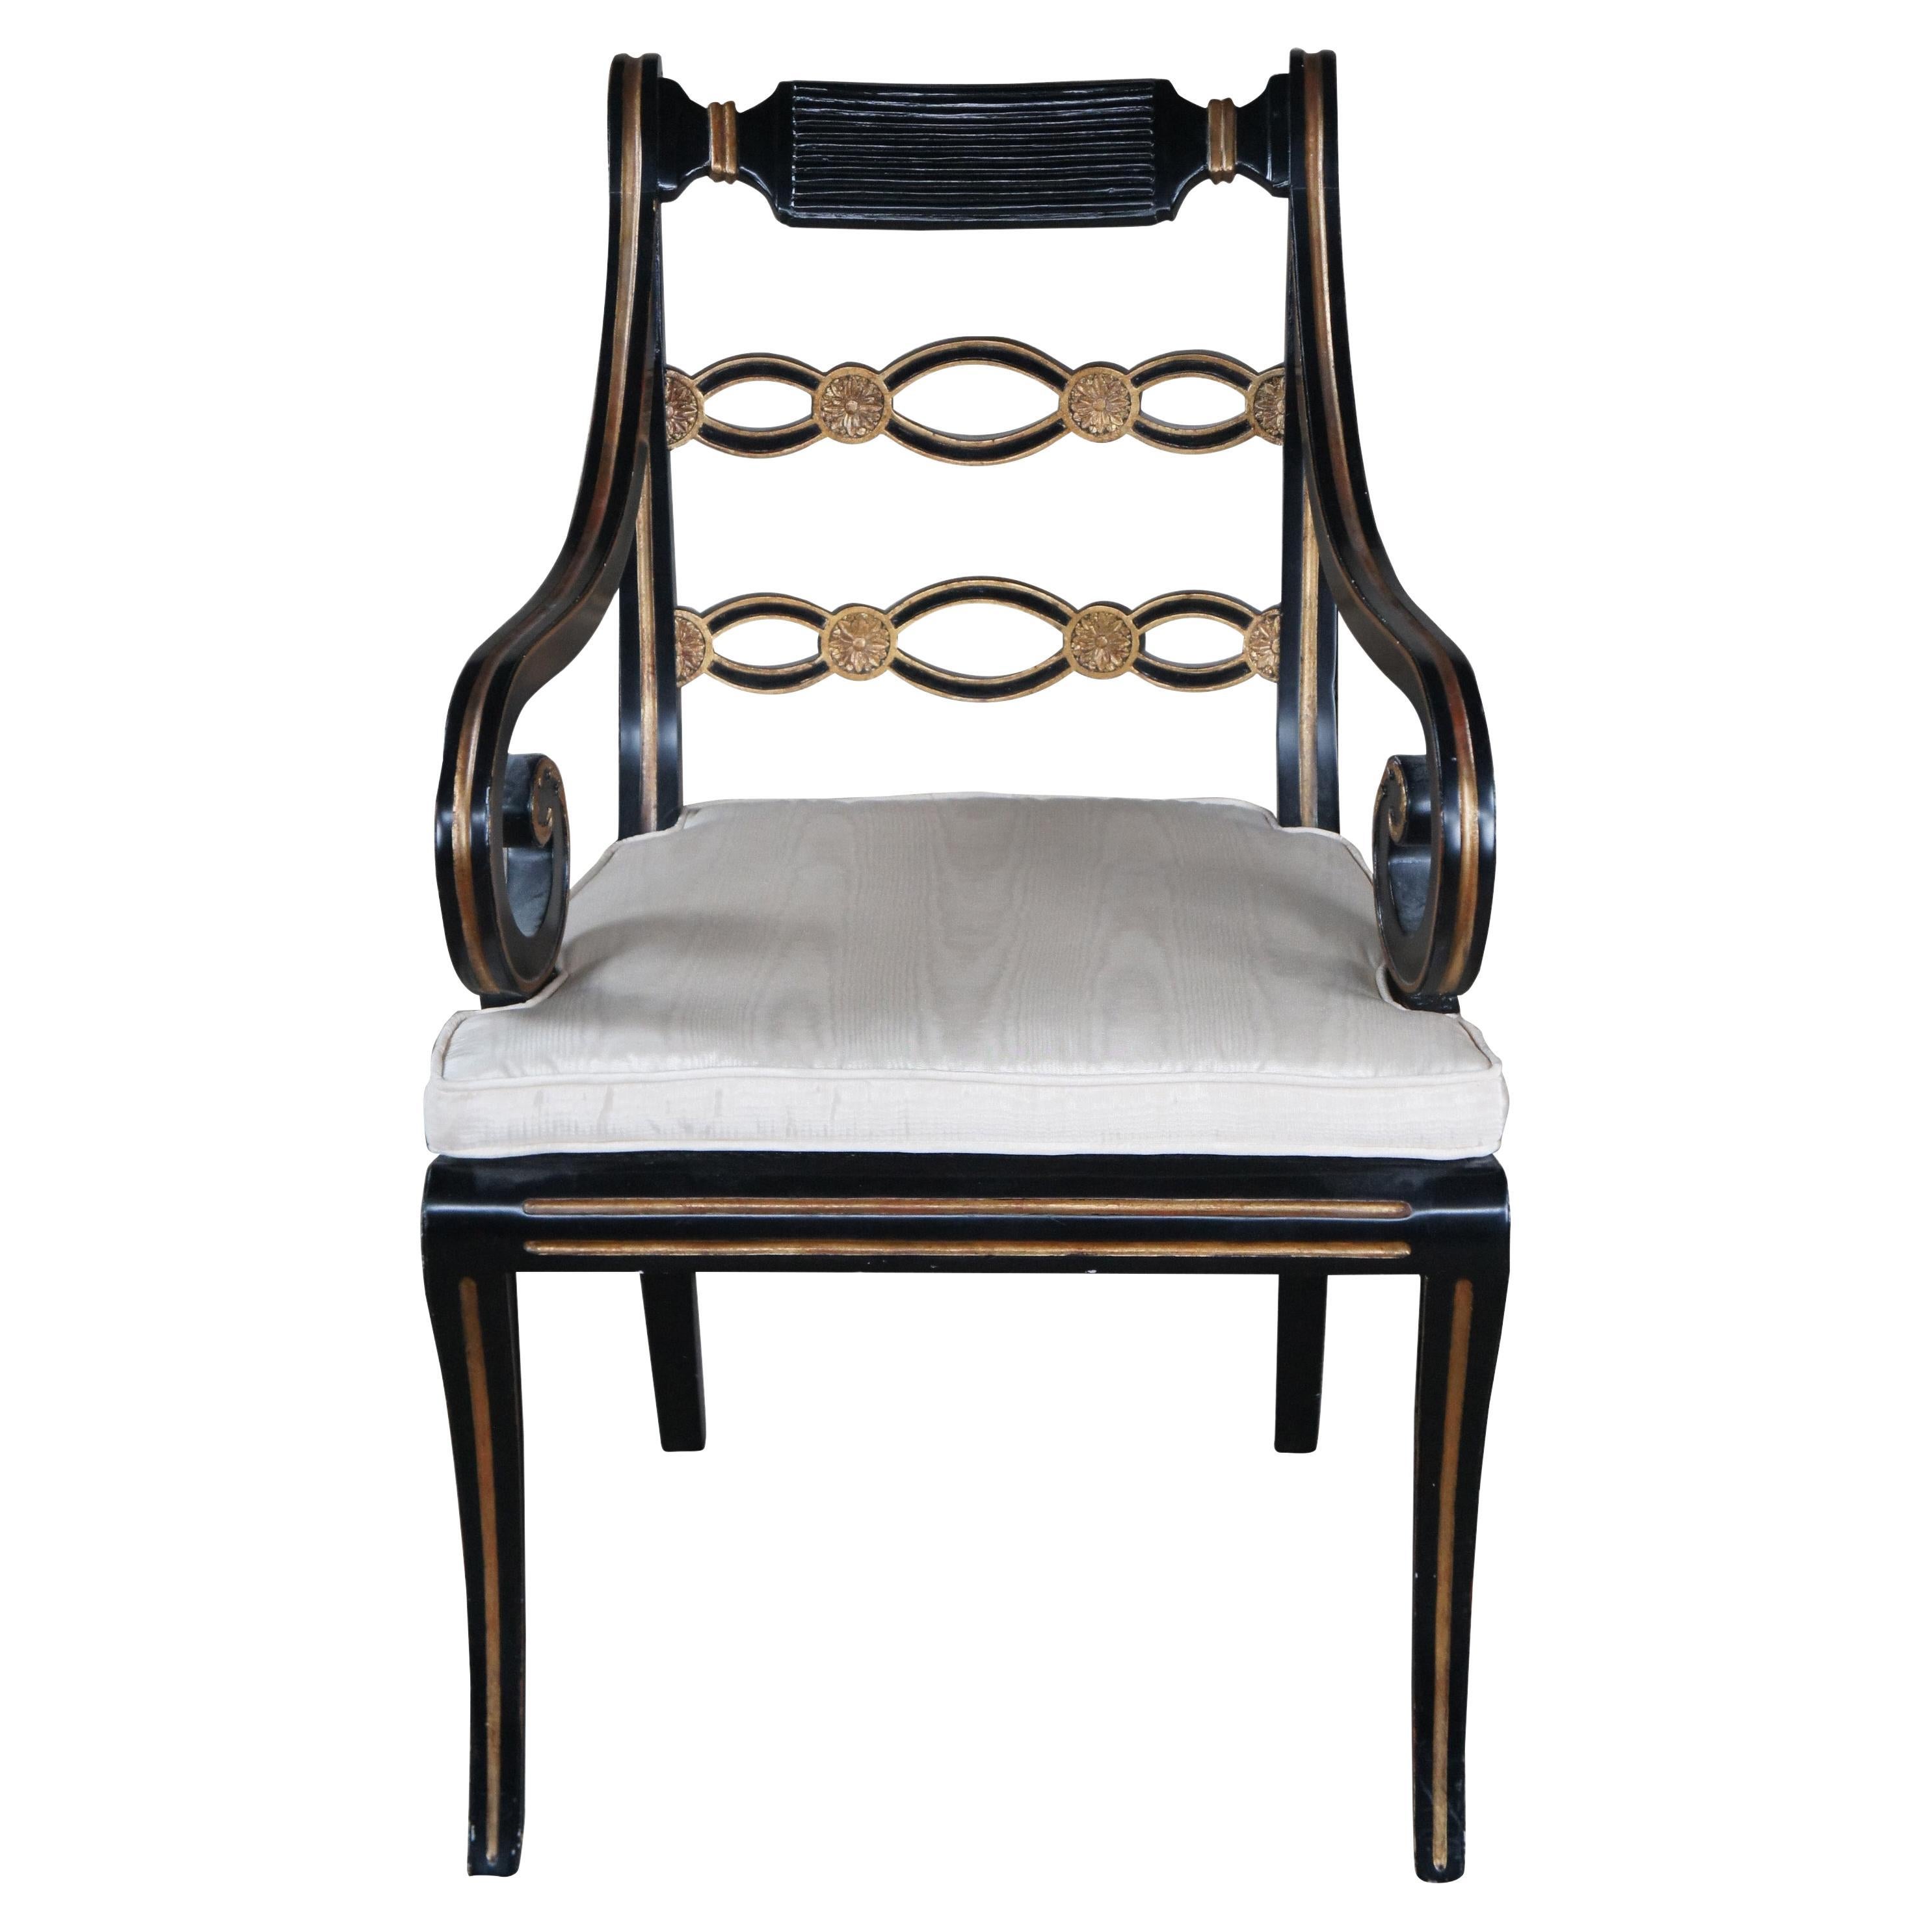 English Regency Caned Riddle Back Ebonized Black & Gold Scrolled Arm Chair  For Sale